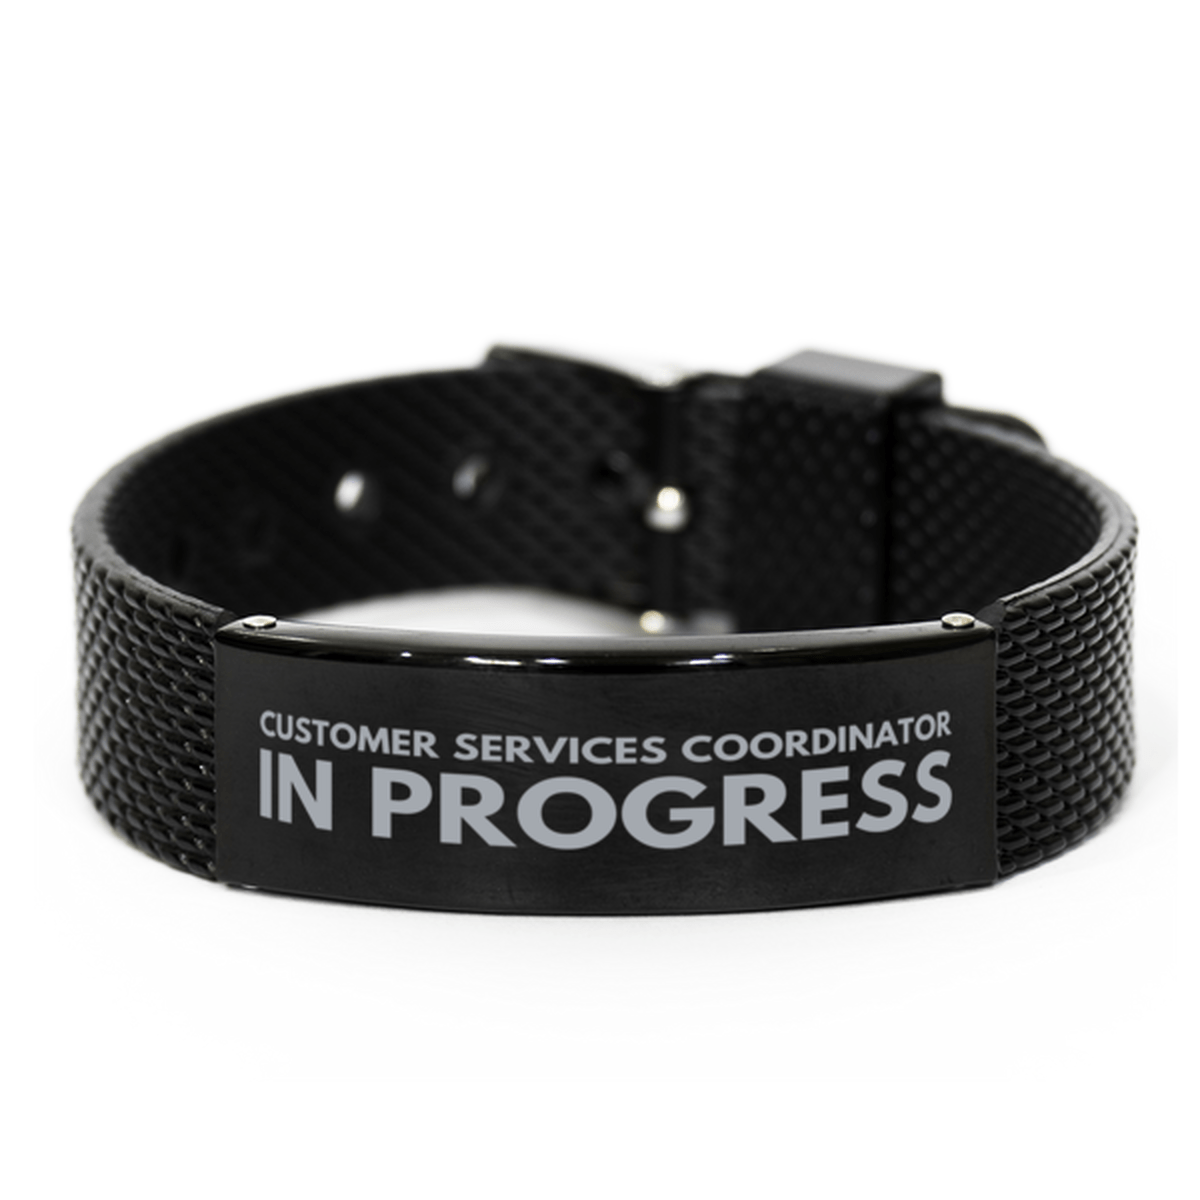 Inspirational Customer Services Coordinator Black Shark Mesh Bracelet, Customer Services Coordinator In Progress, Best Graduation Gifts for Students